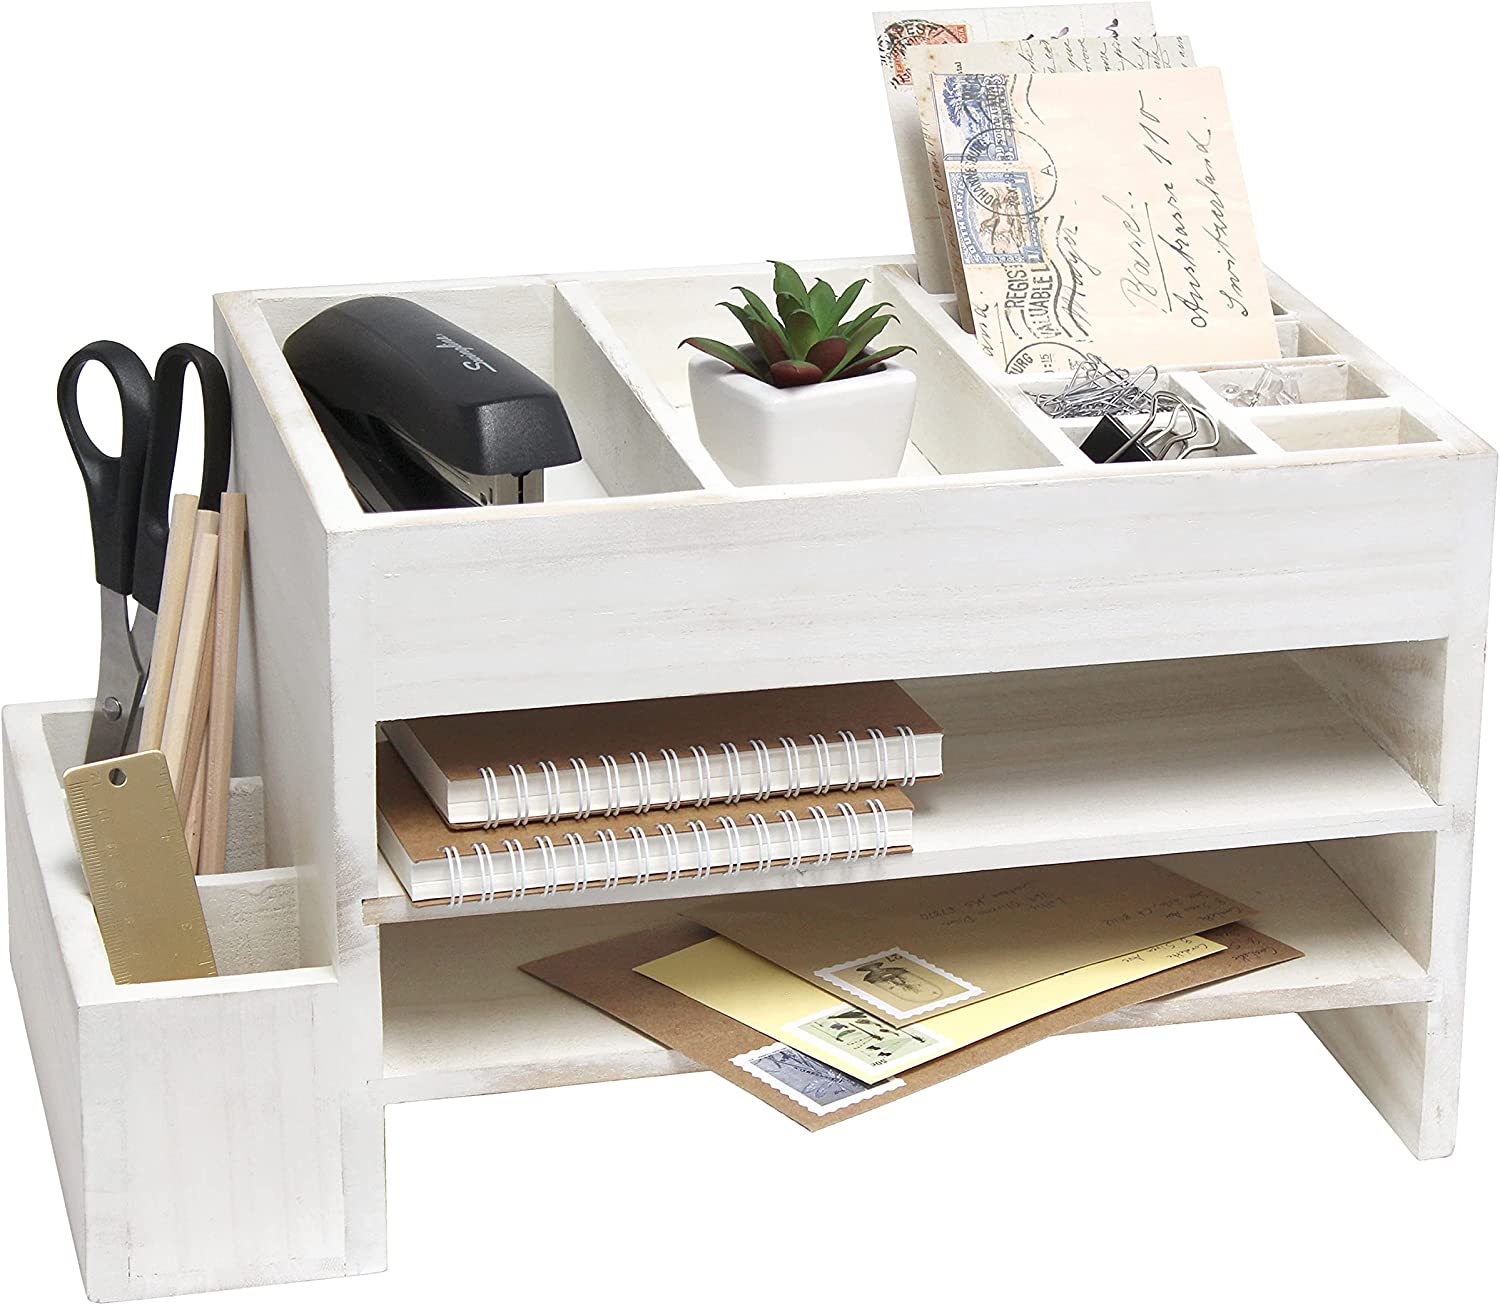 Elegant Designs HG1021-WWH Home Office Wood Tiered Organizer with Storage Cubbies and Letter Tray Desk Caddy, White Wash